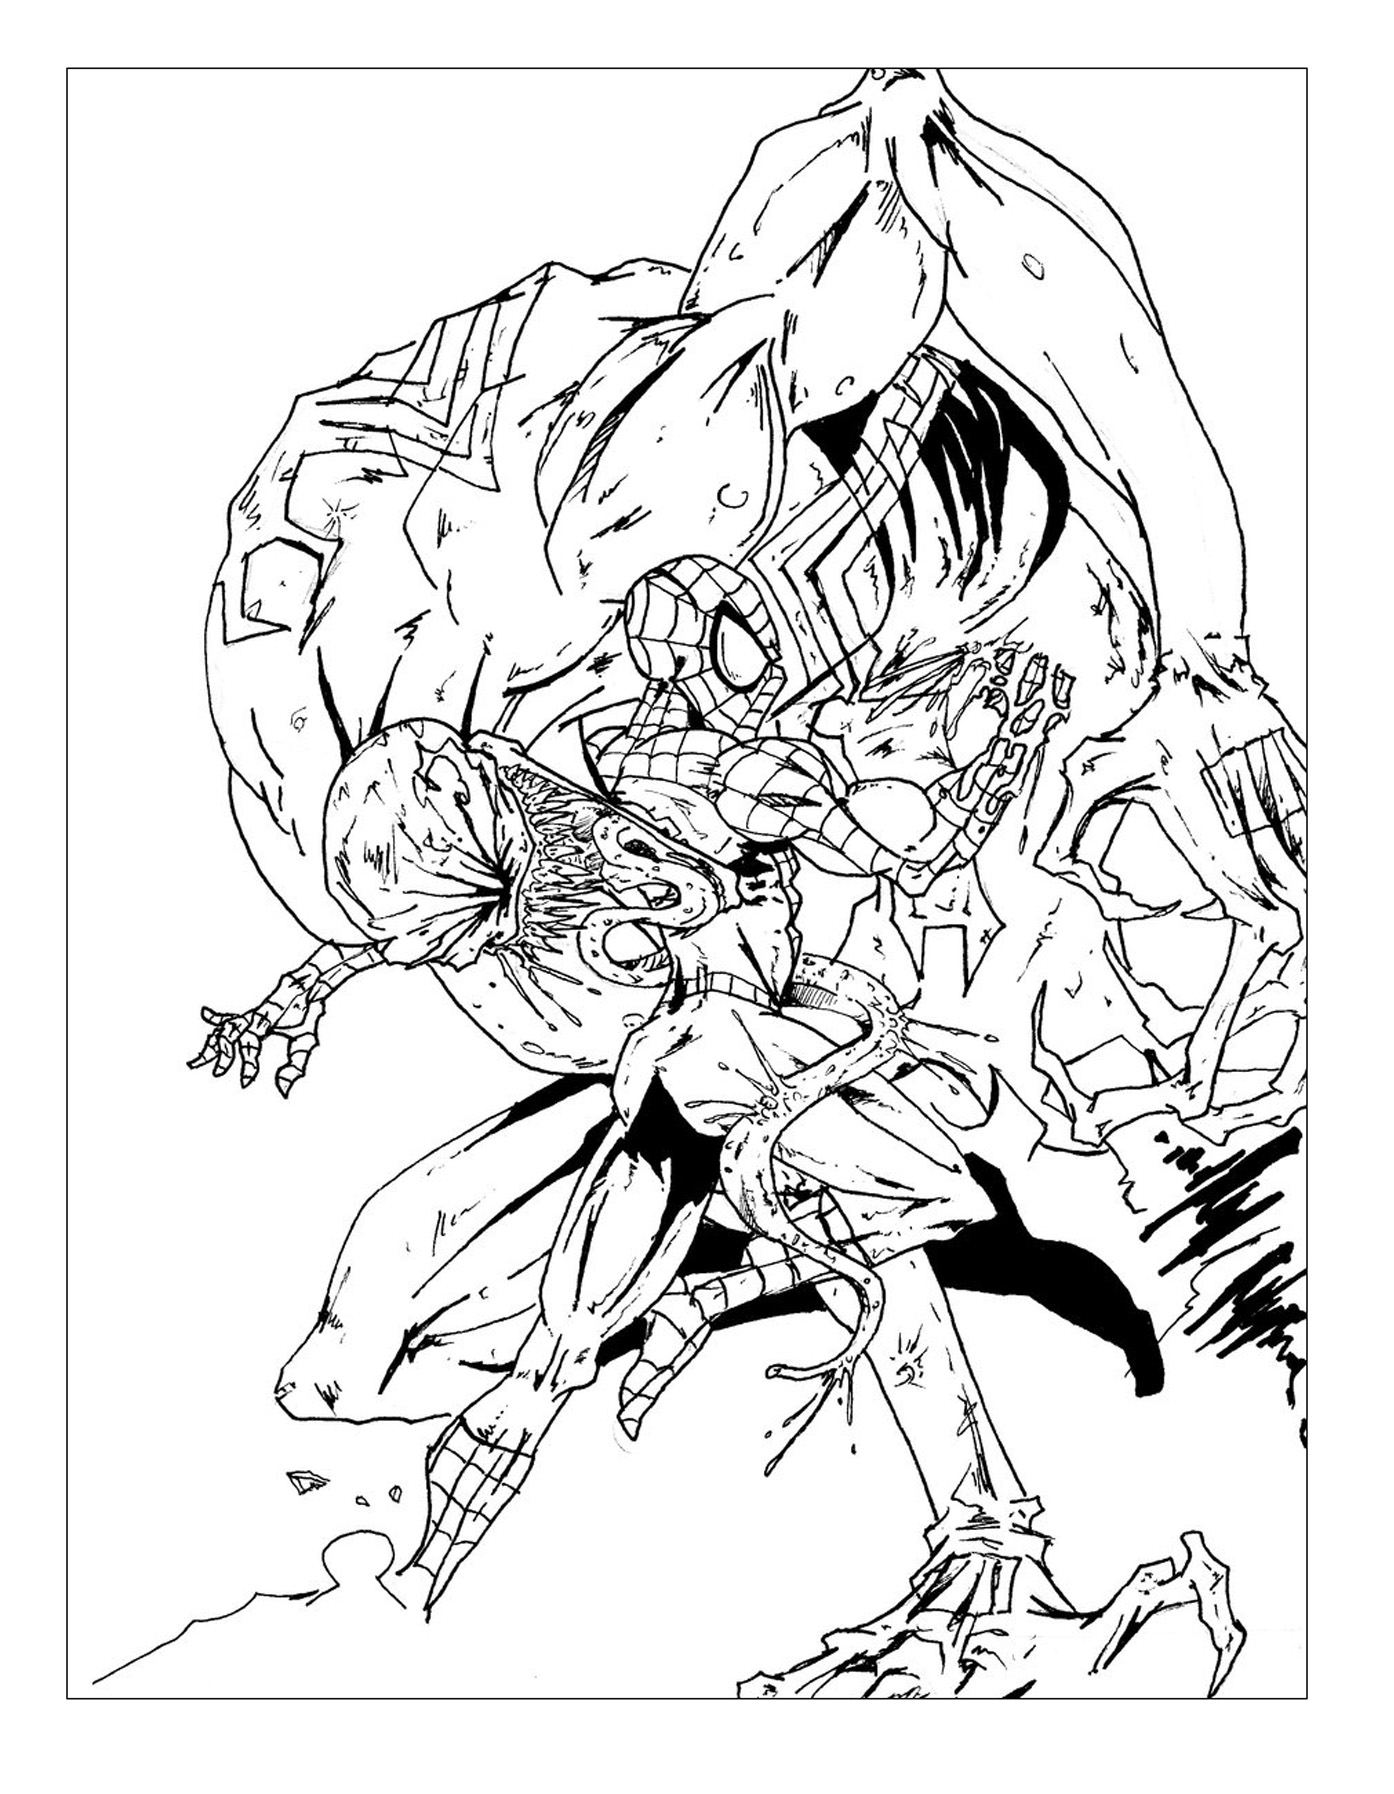 Spiderman battle comic - Books Adult Coloring Pages